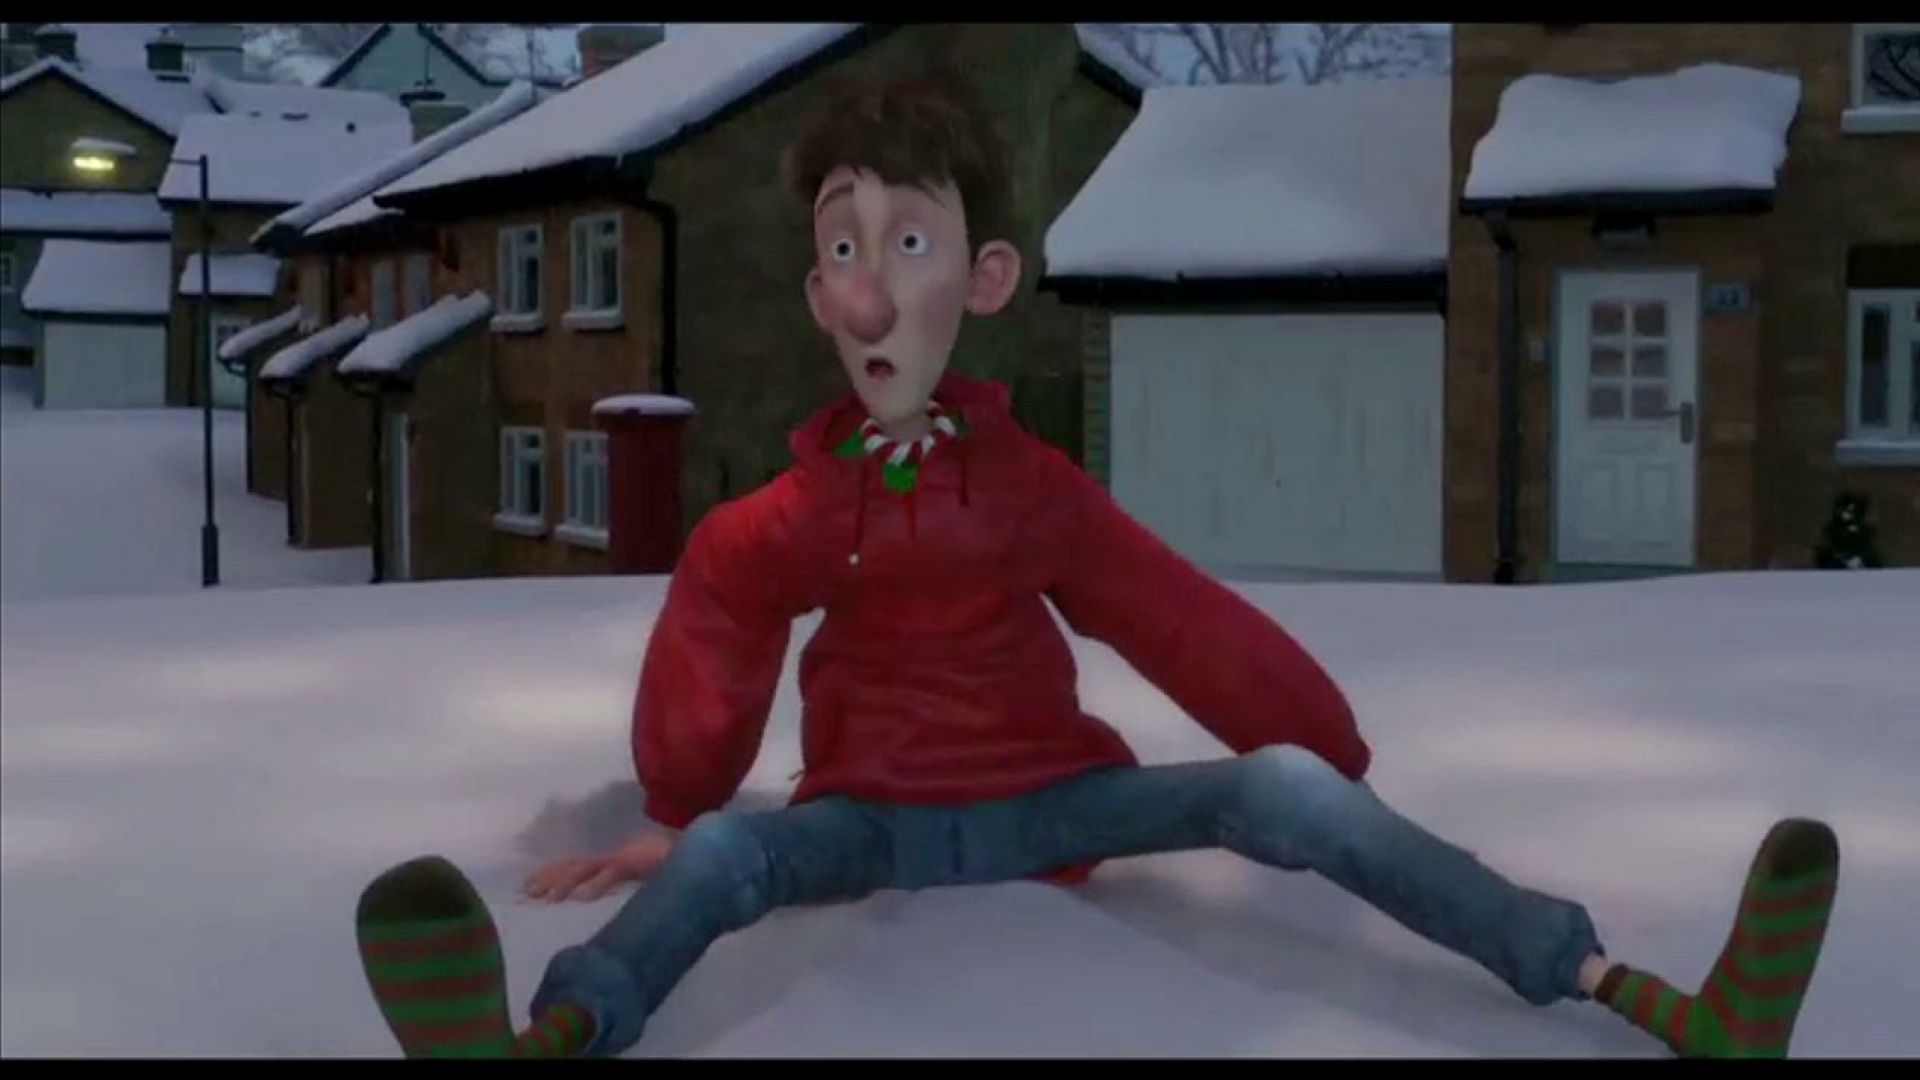 The bike gets wrapped while Arthur rides it in Arthur Christmas